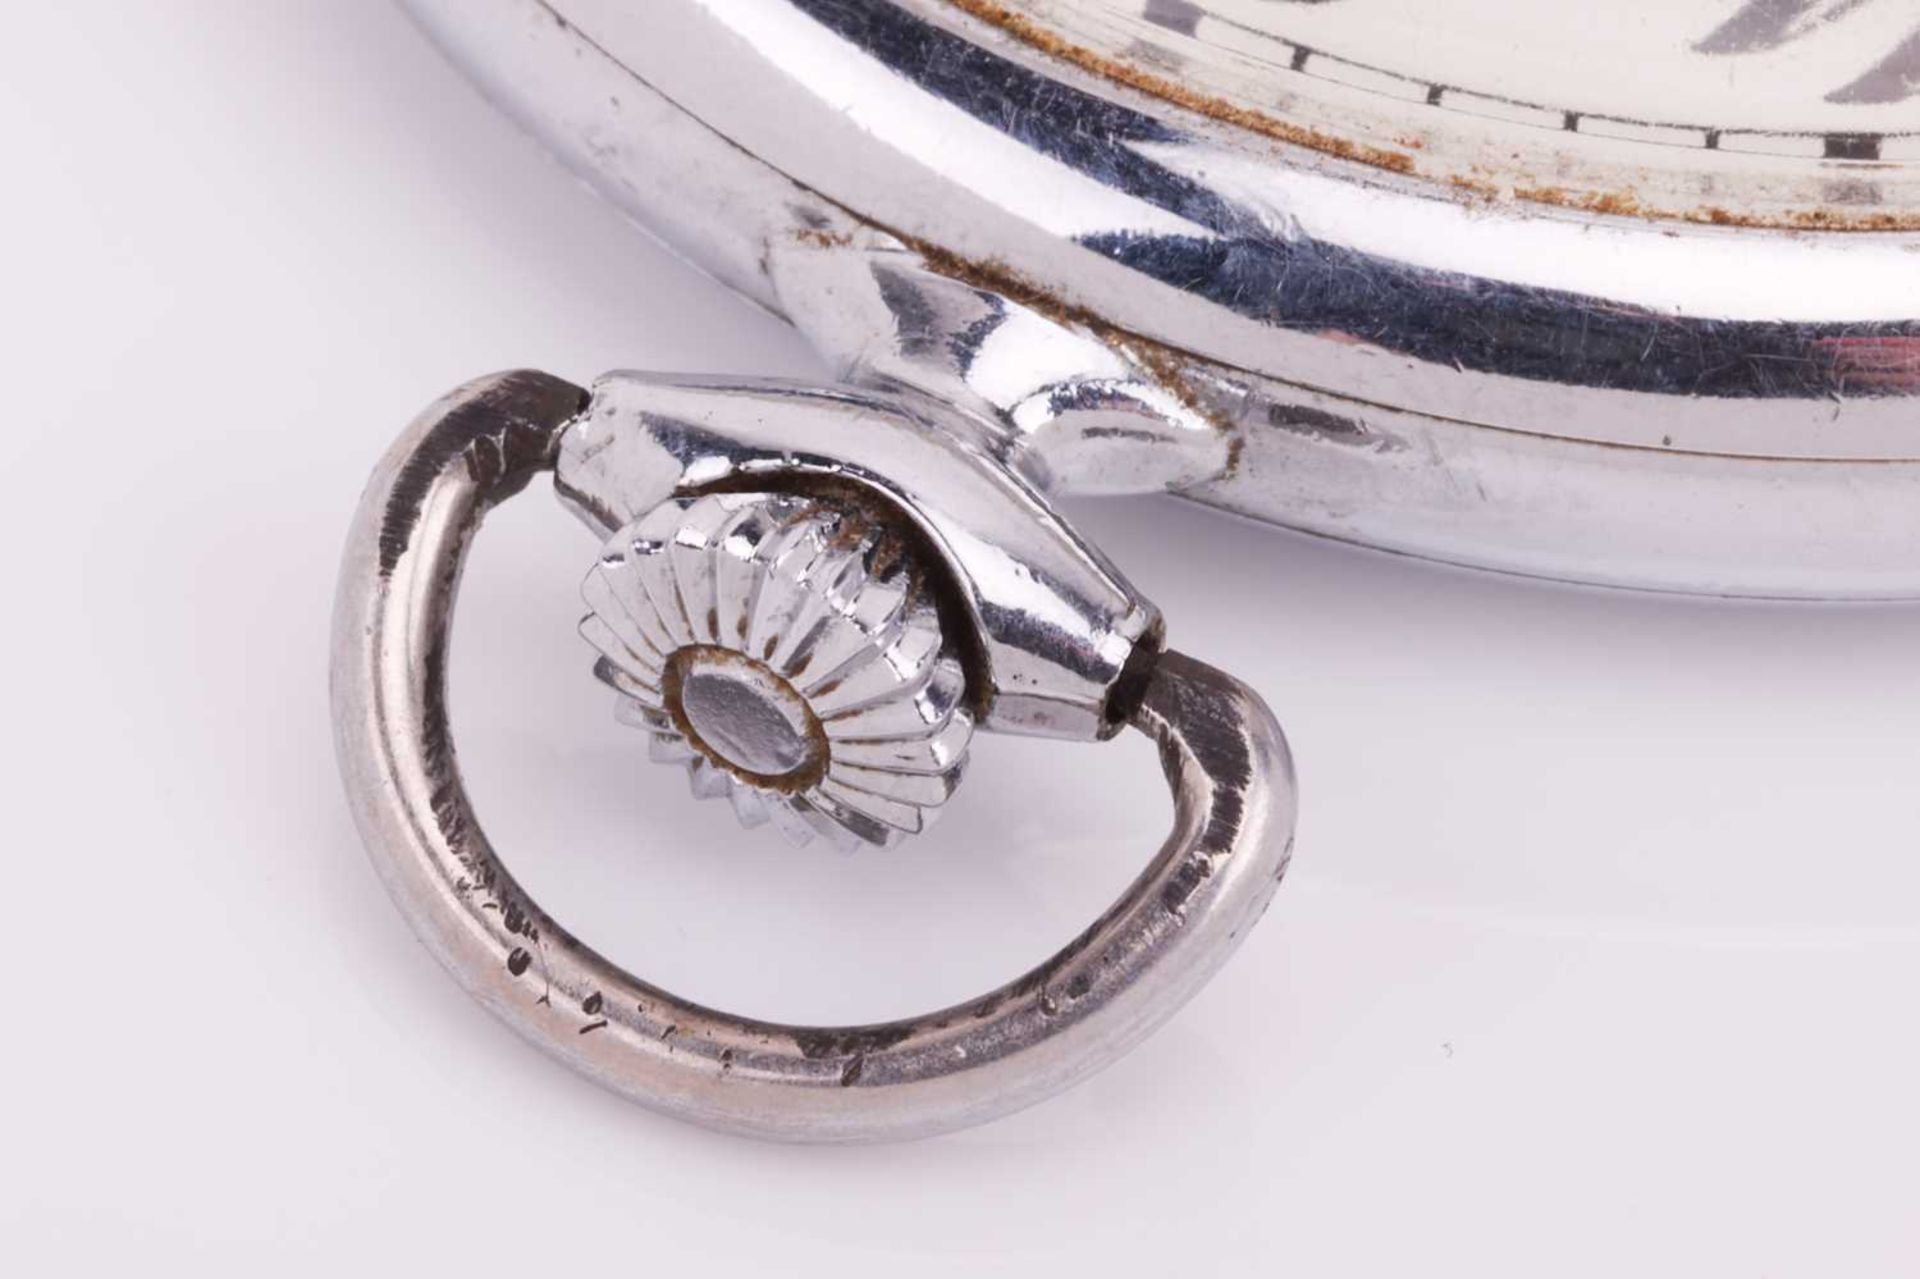 An Omega open-face pocket watch, featuring a keyless wound movement calibre 960 in a steel case - Image 4 of 4